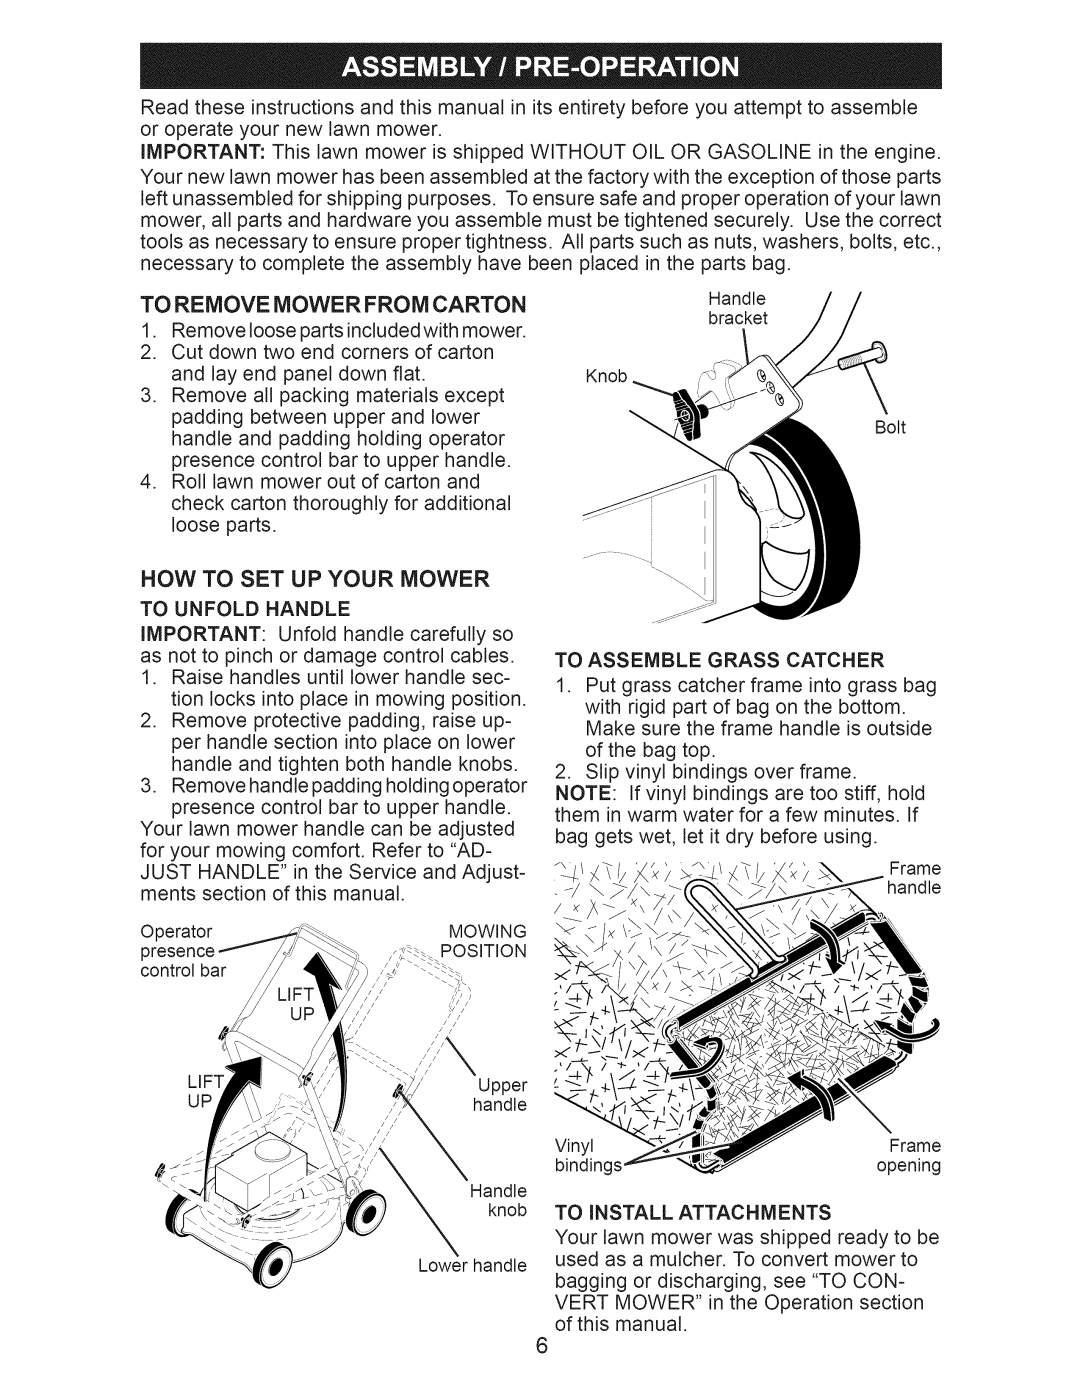 Craftsman 917.376395 manual To Remove Mower From Carton, Now To Set Up Your Mower 